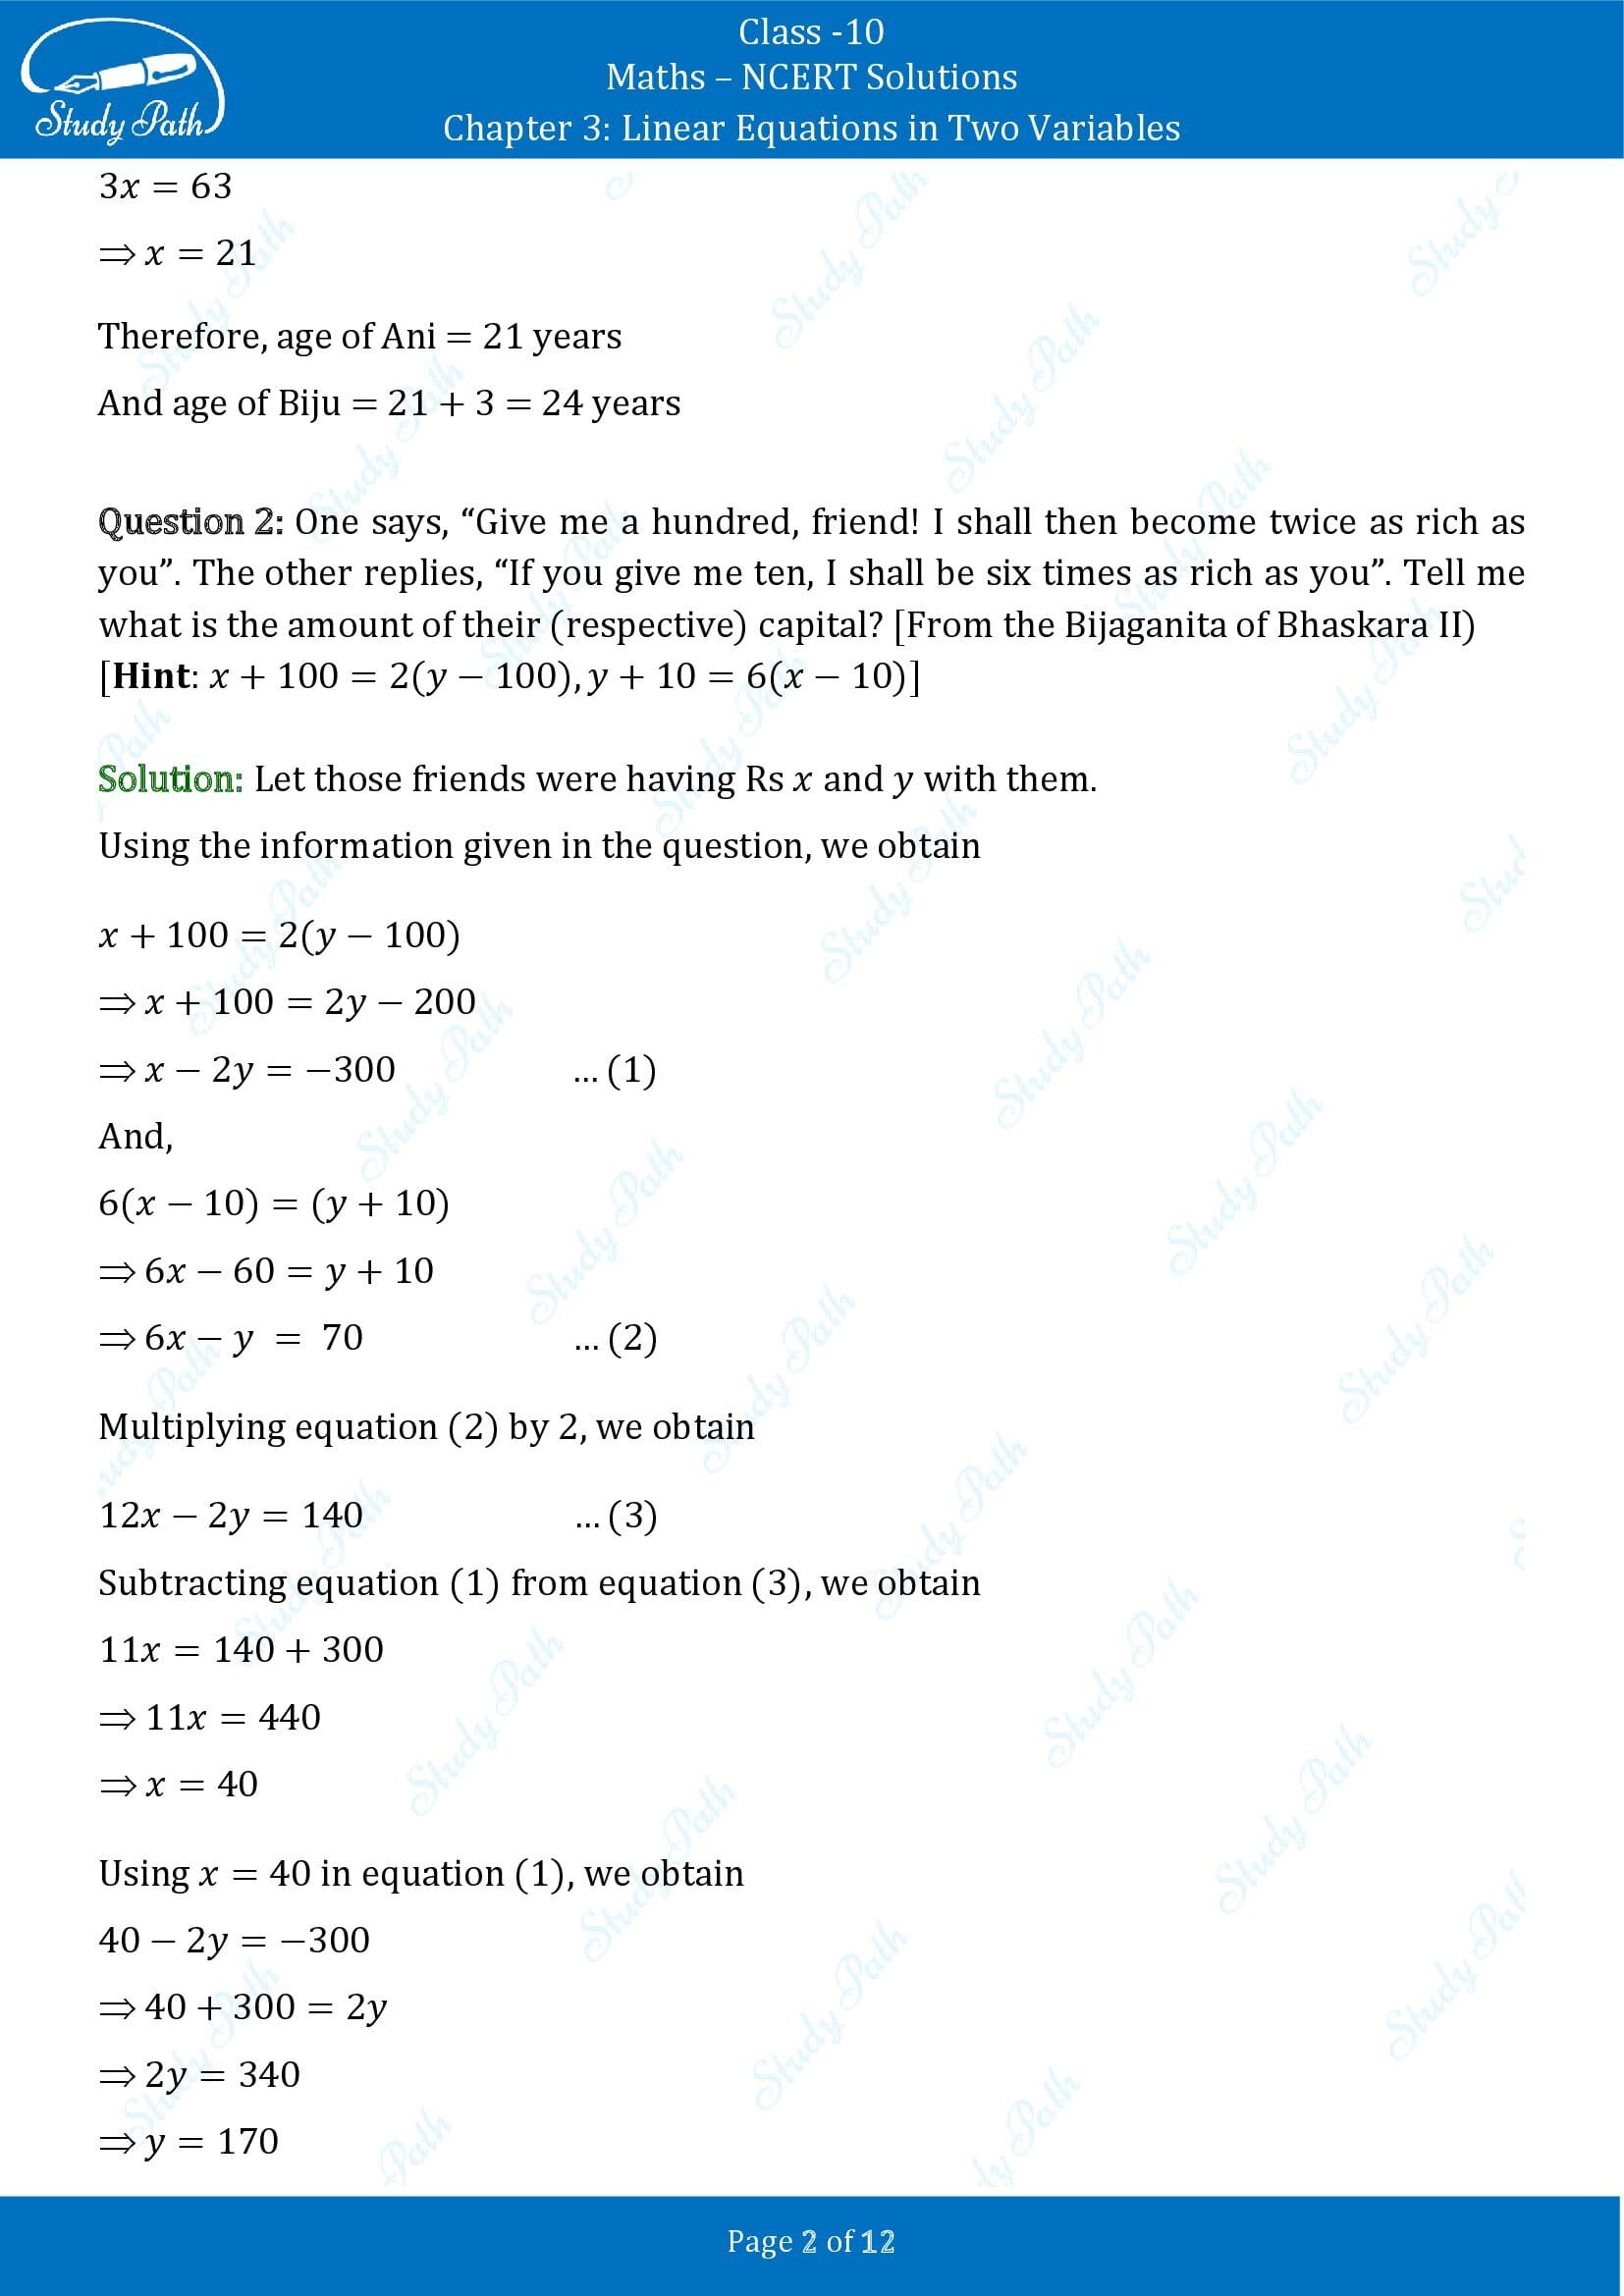 NCERT Solutions for Class 10 Maths Chapter 3 Linear Equations in Two Variables Exercise 3.7 00002